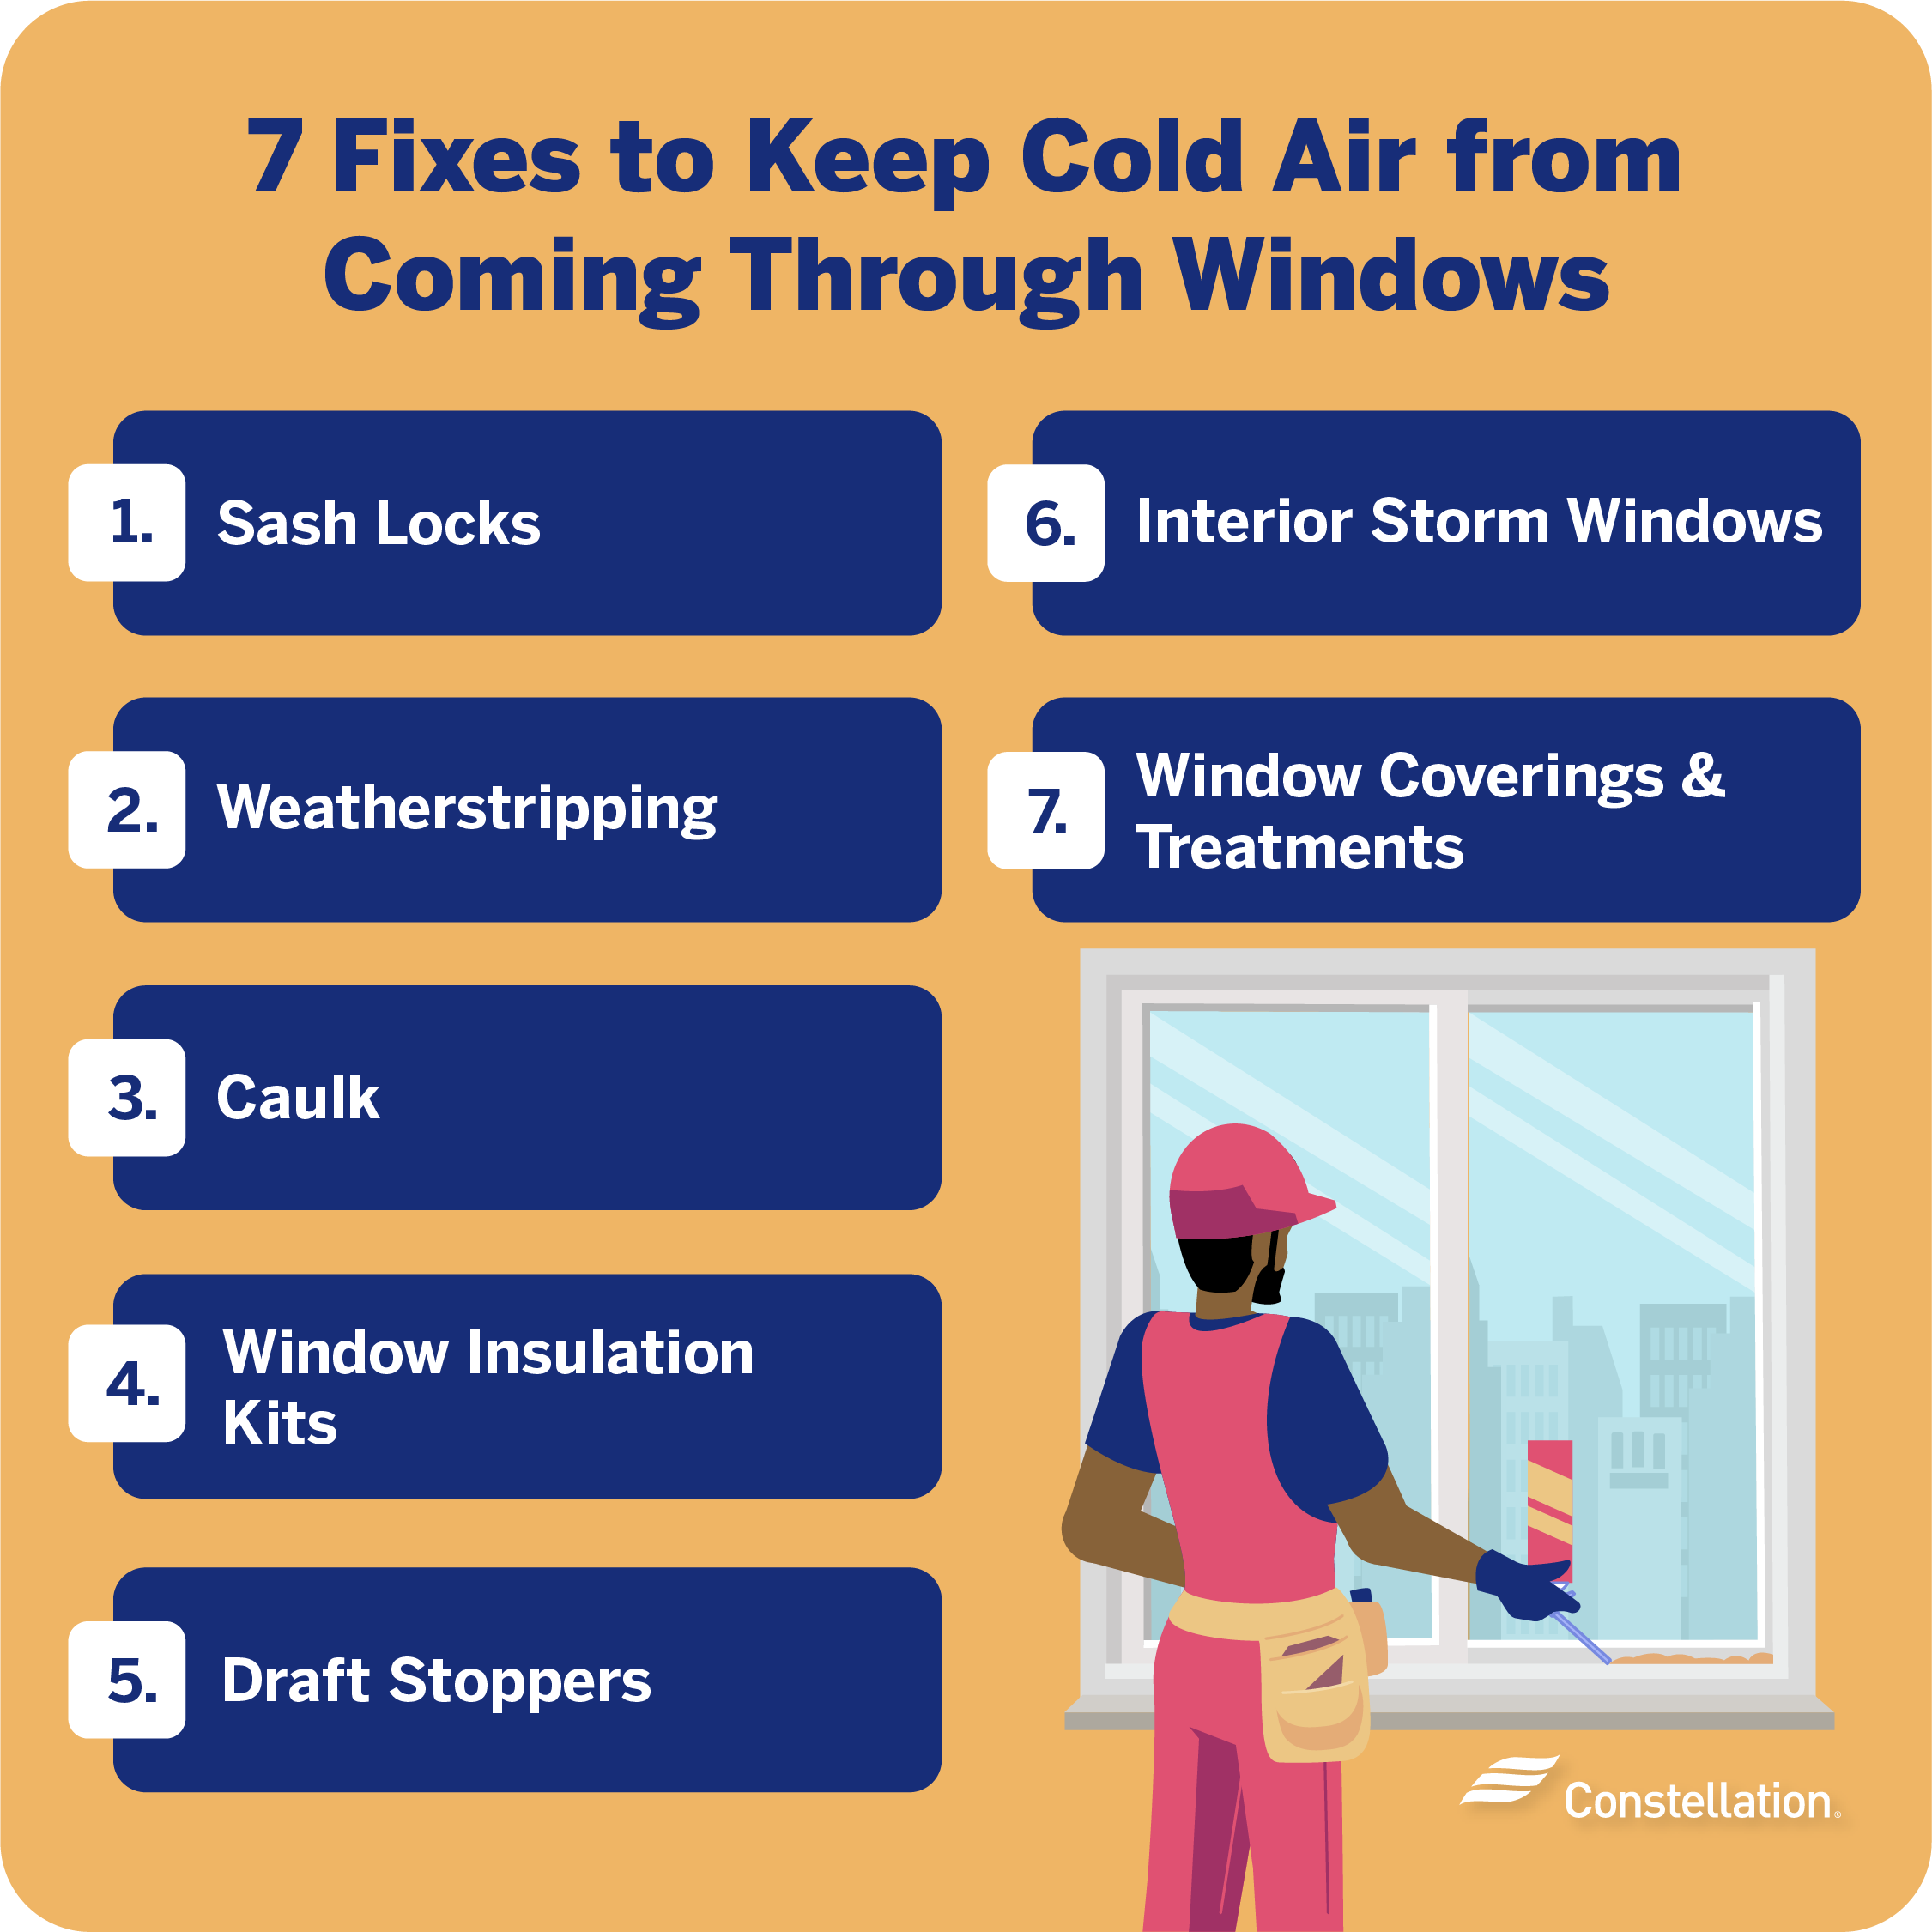 How to keep cold air from coming through windows.